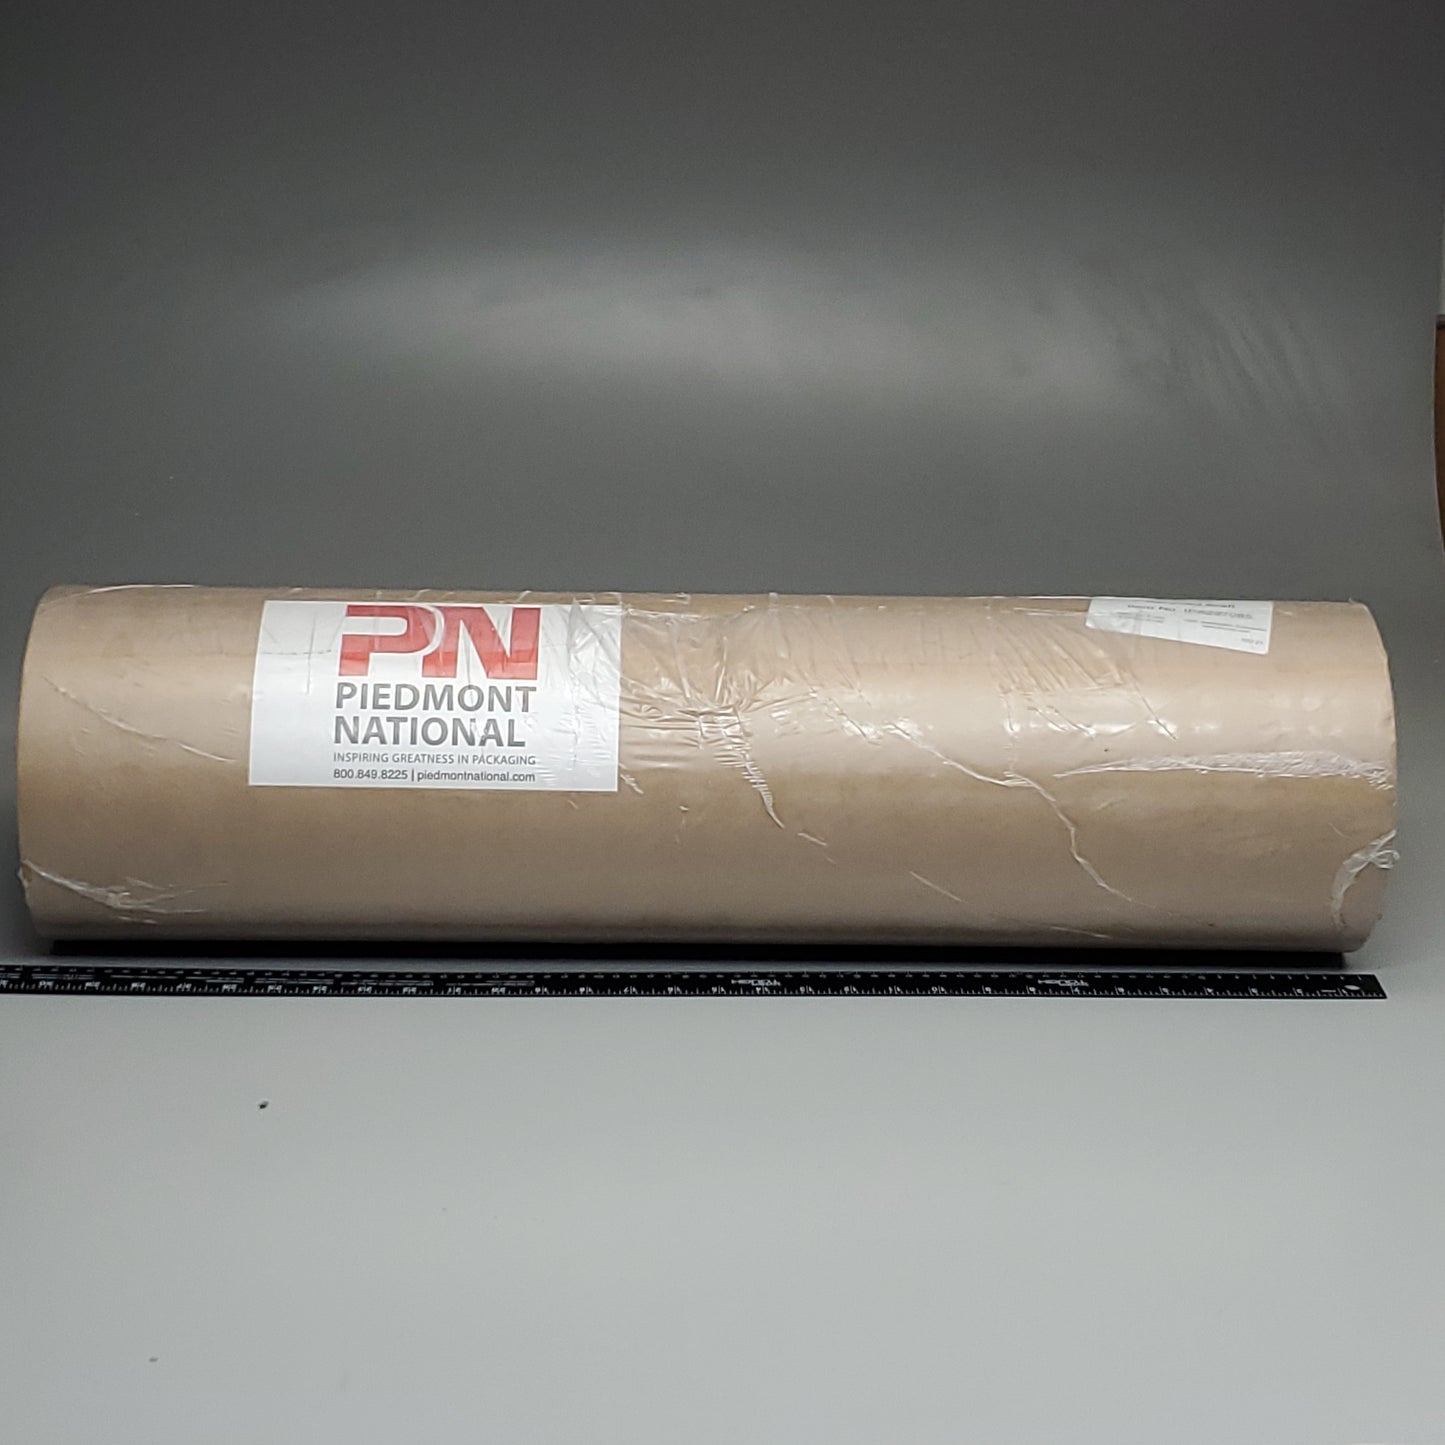 PIEDMONT NATIONAL Recycled Kraft Paper 30" X 1200' 30 lb Brown IPA297085 (New)